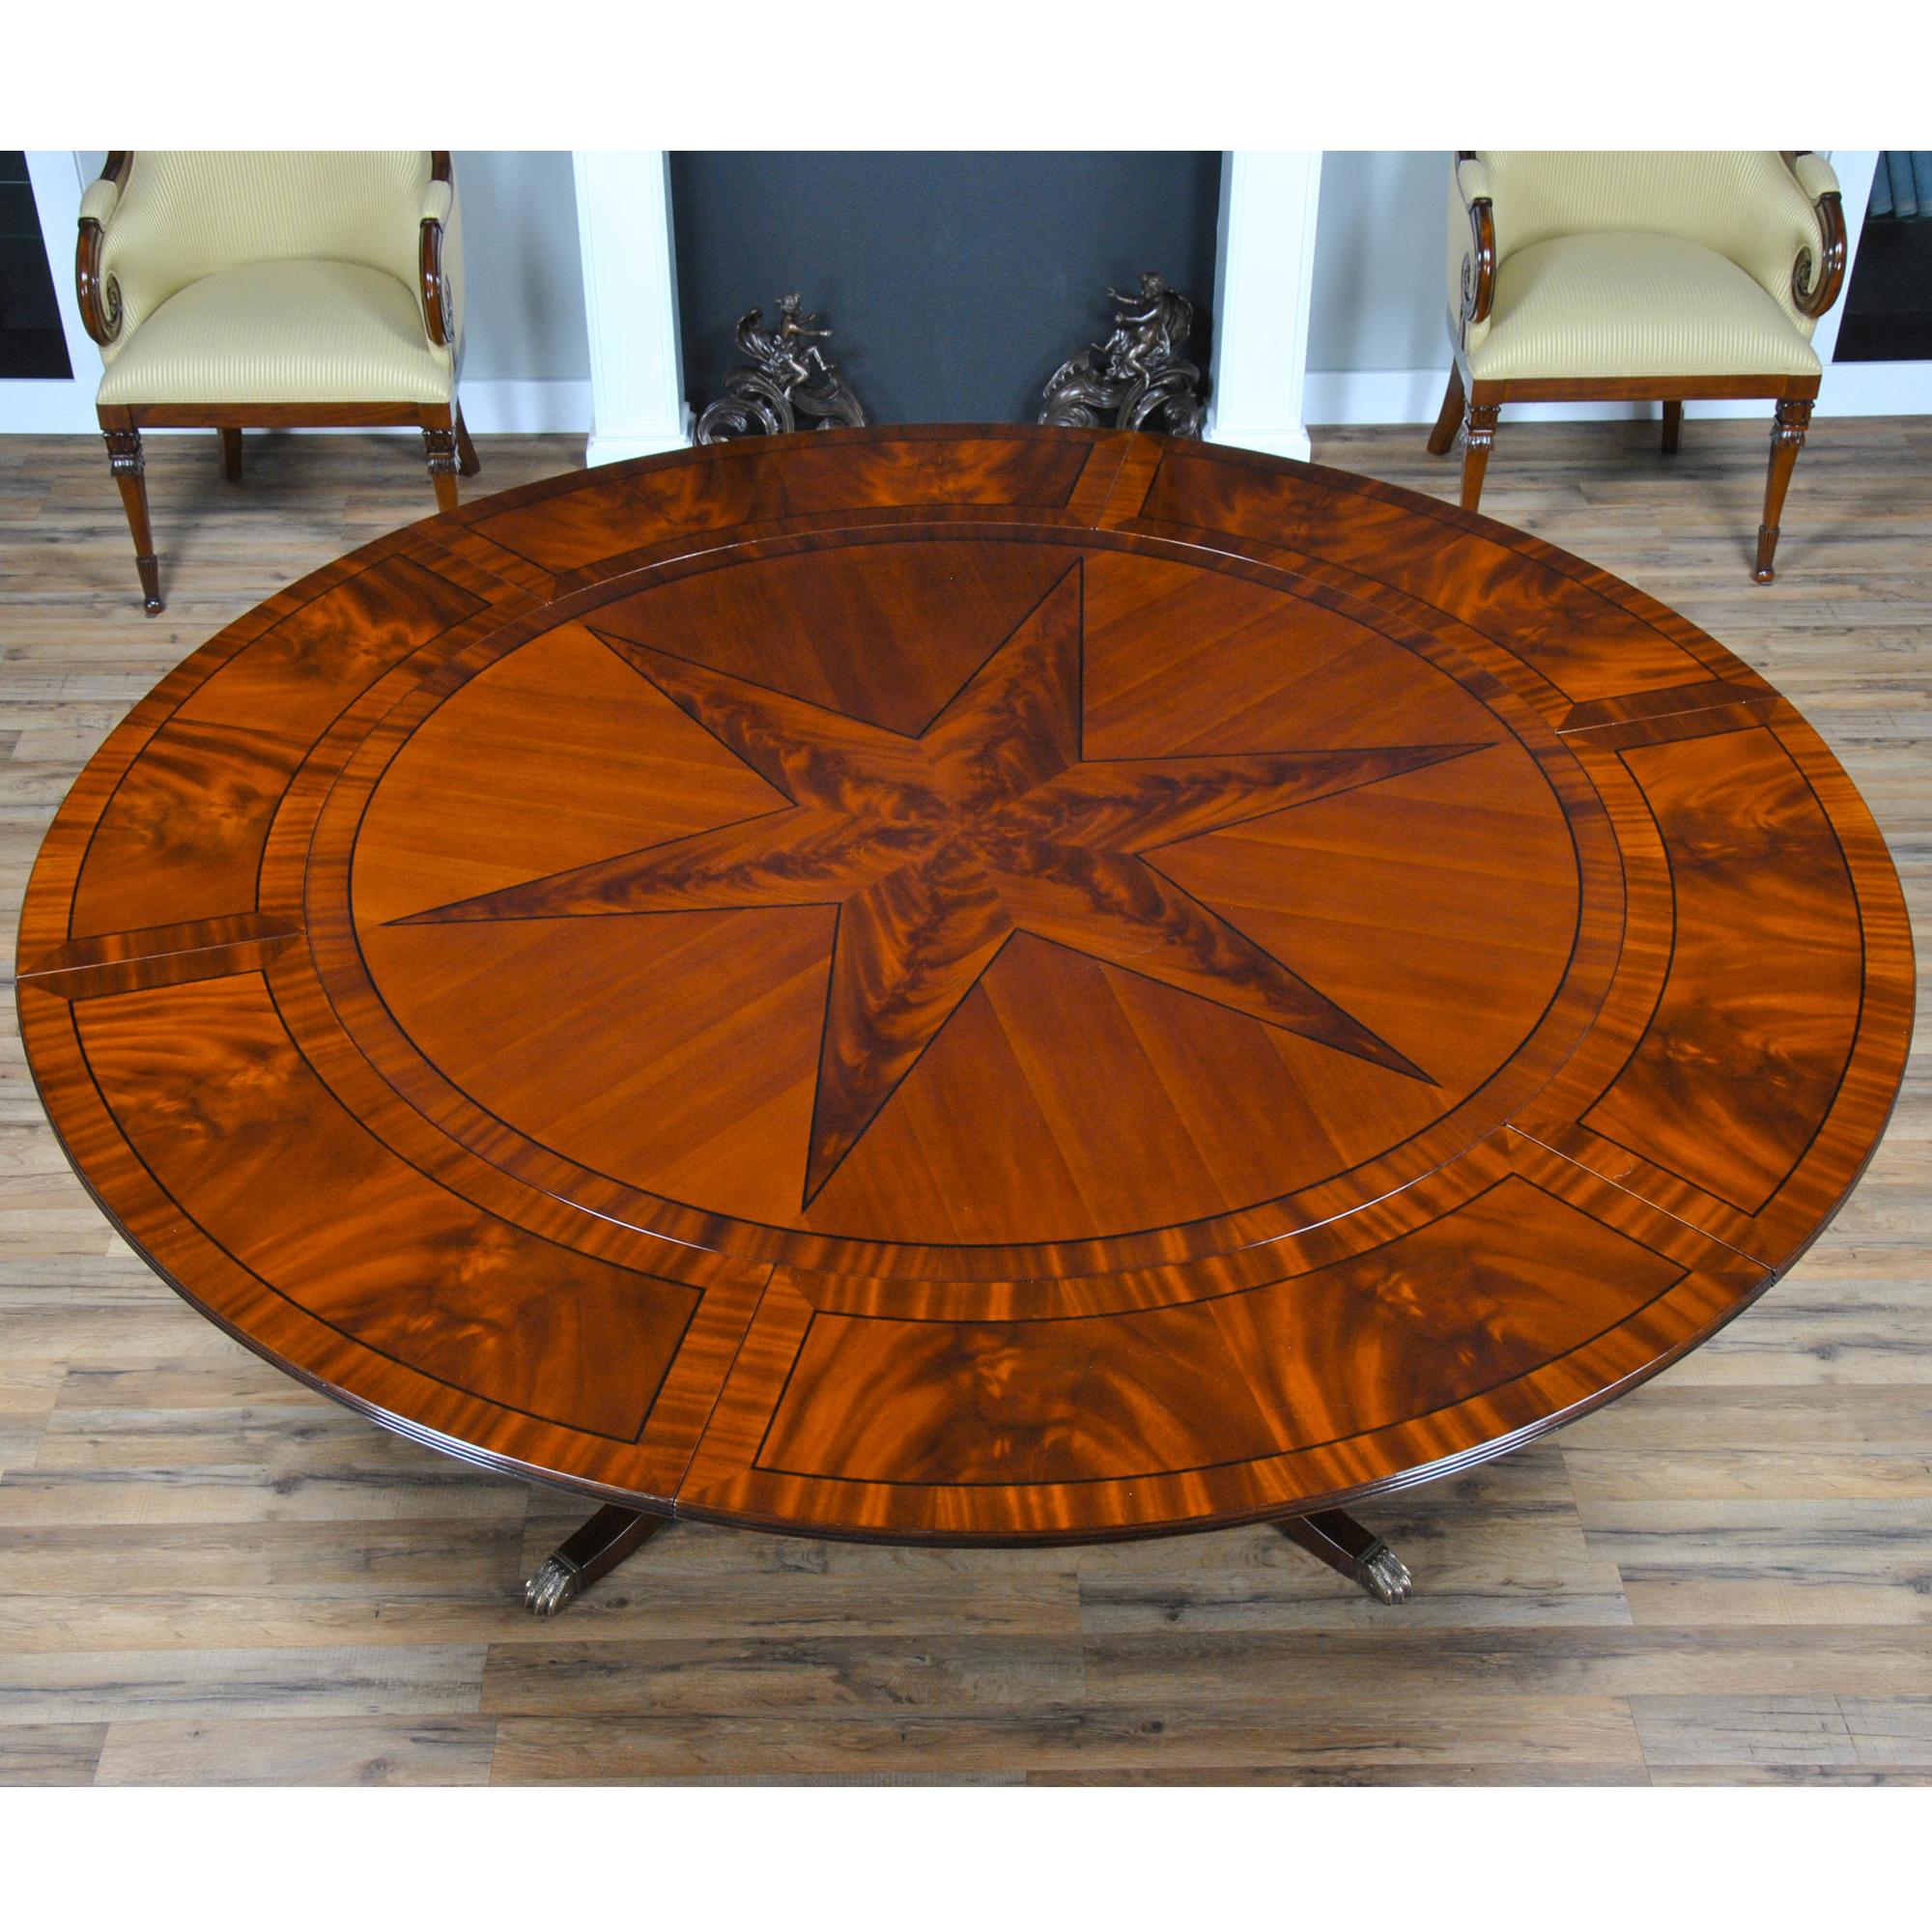 A sixty inch round Star Perimeter Dining Table is produced using the highest quality figured mahogany star in the center of the field and sapele banding around the edge of the table which makes for an interesting contrast in the pattern on the top.